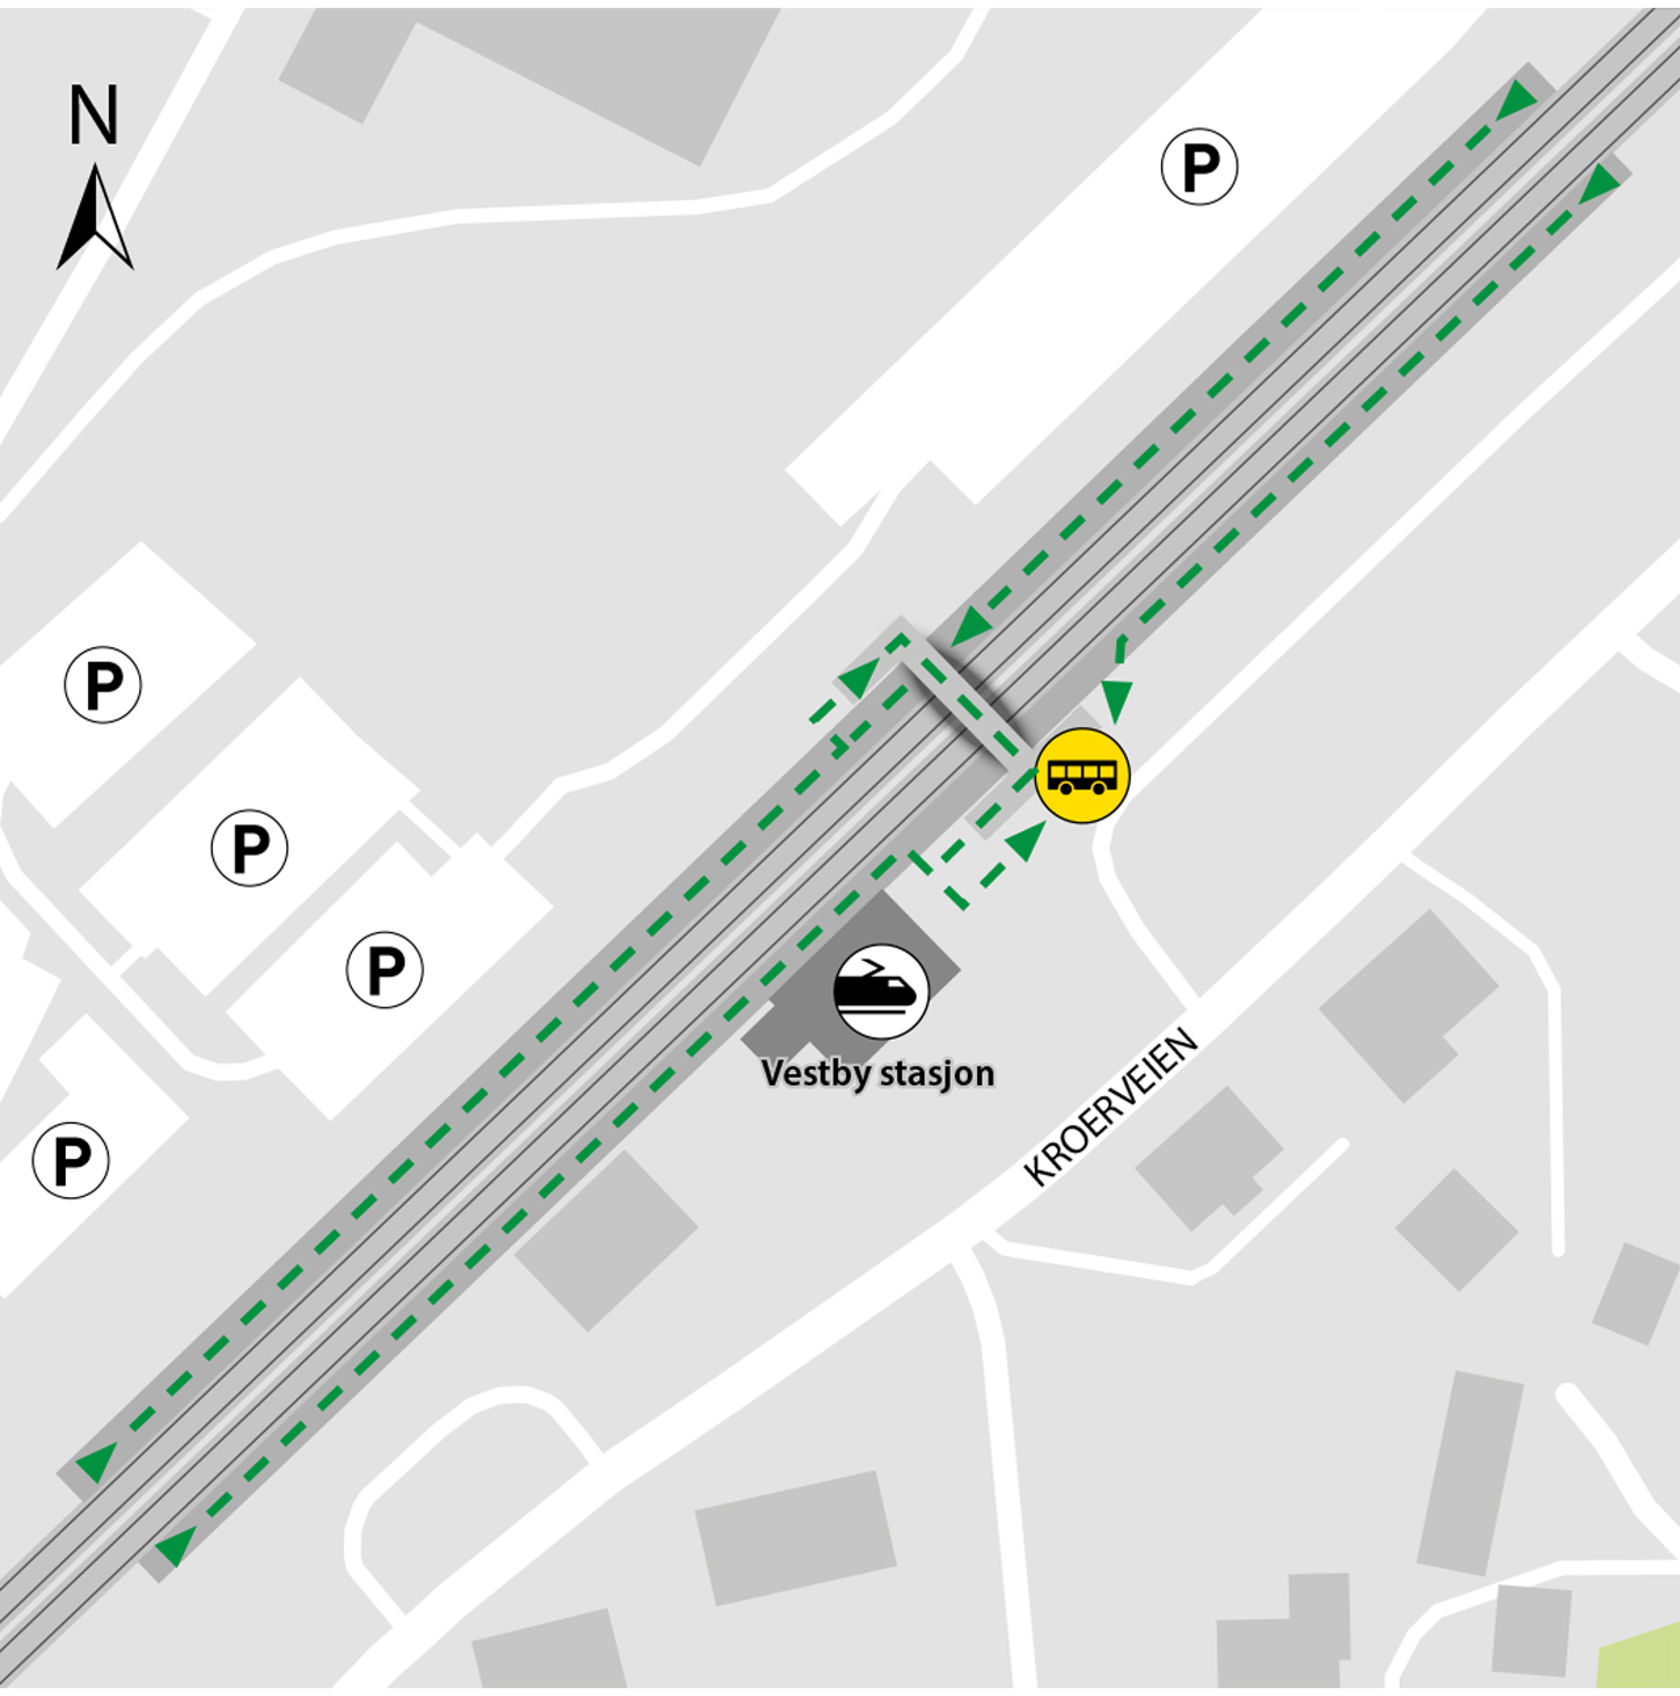 Map shows rail replacement service departs from bus stop from Vestby station.